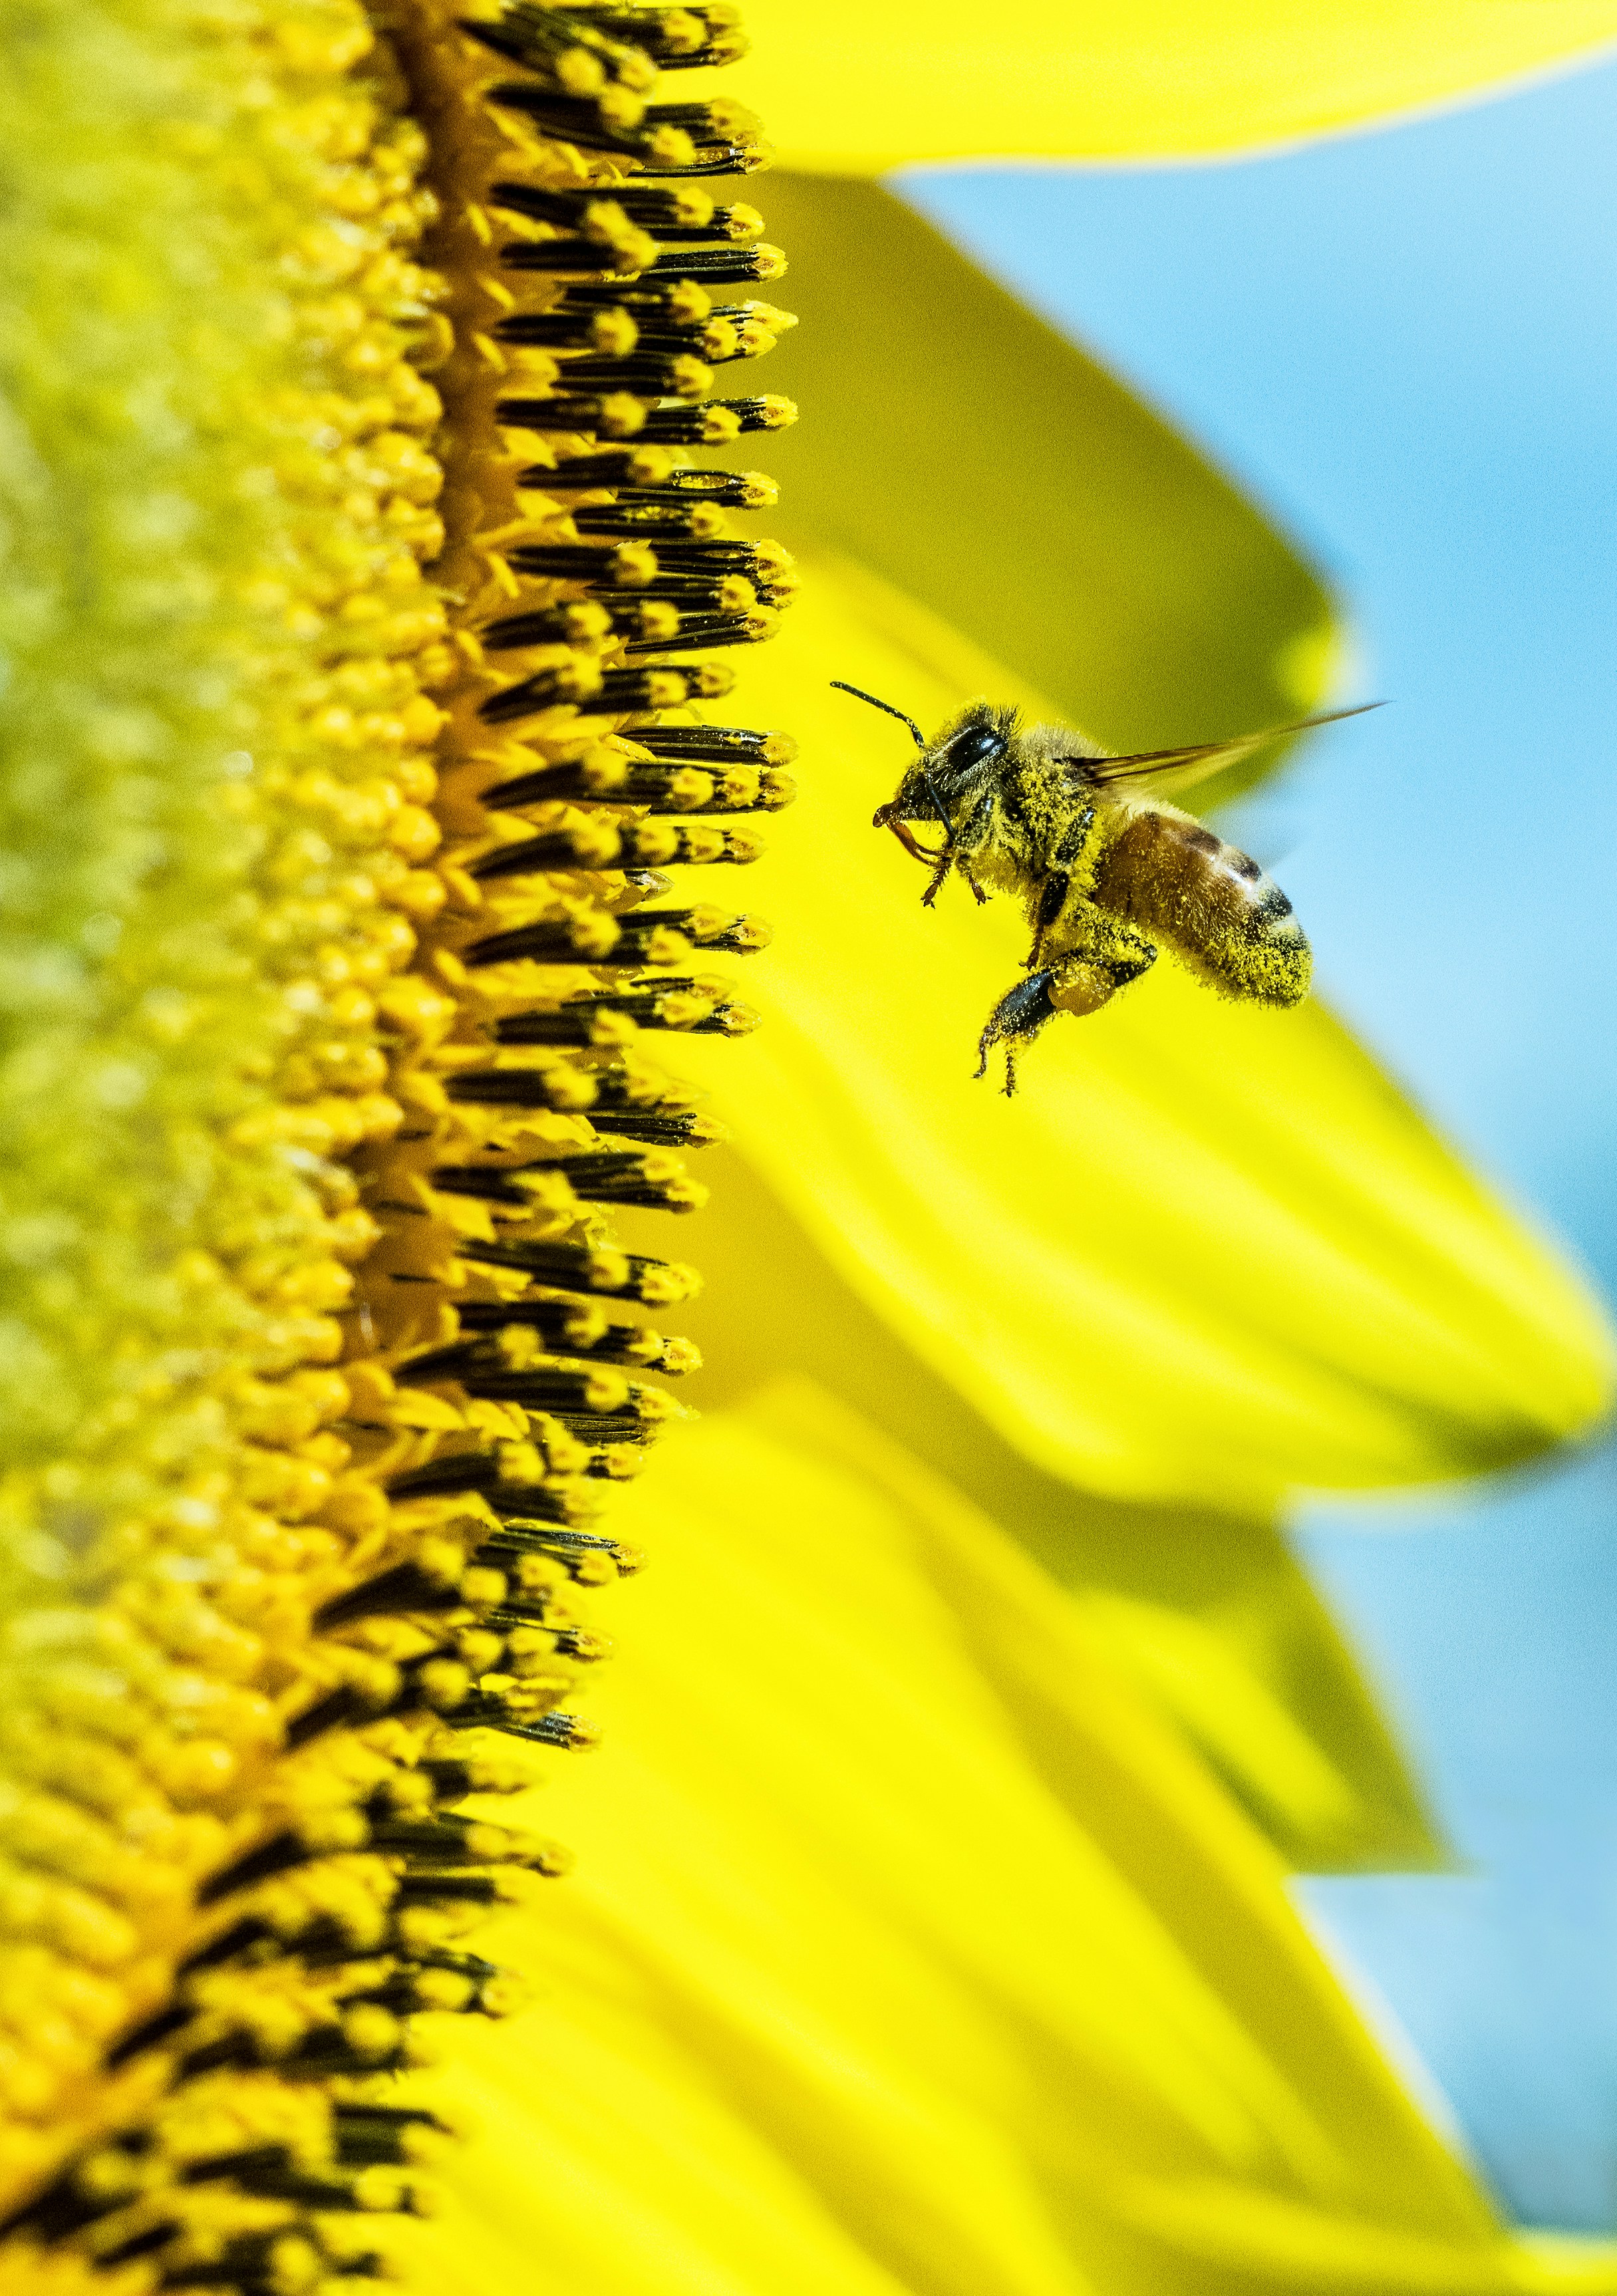 Bees work very hard and do a fantastic job of cross pollinating fruit trees, vegetable flowers, etc., which provide us with food. This one is covered in sun flower pollen, and is obviously doing a good job, so that there should be a huge crop of sun flower seeds.